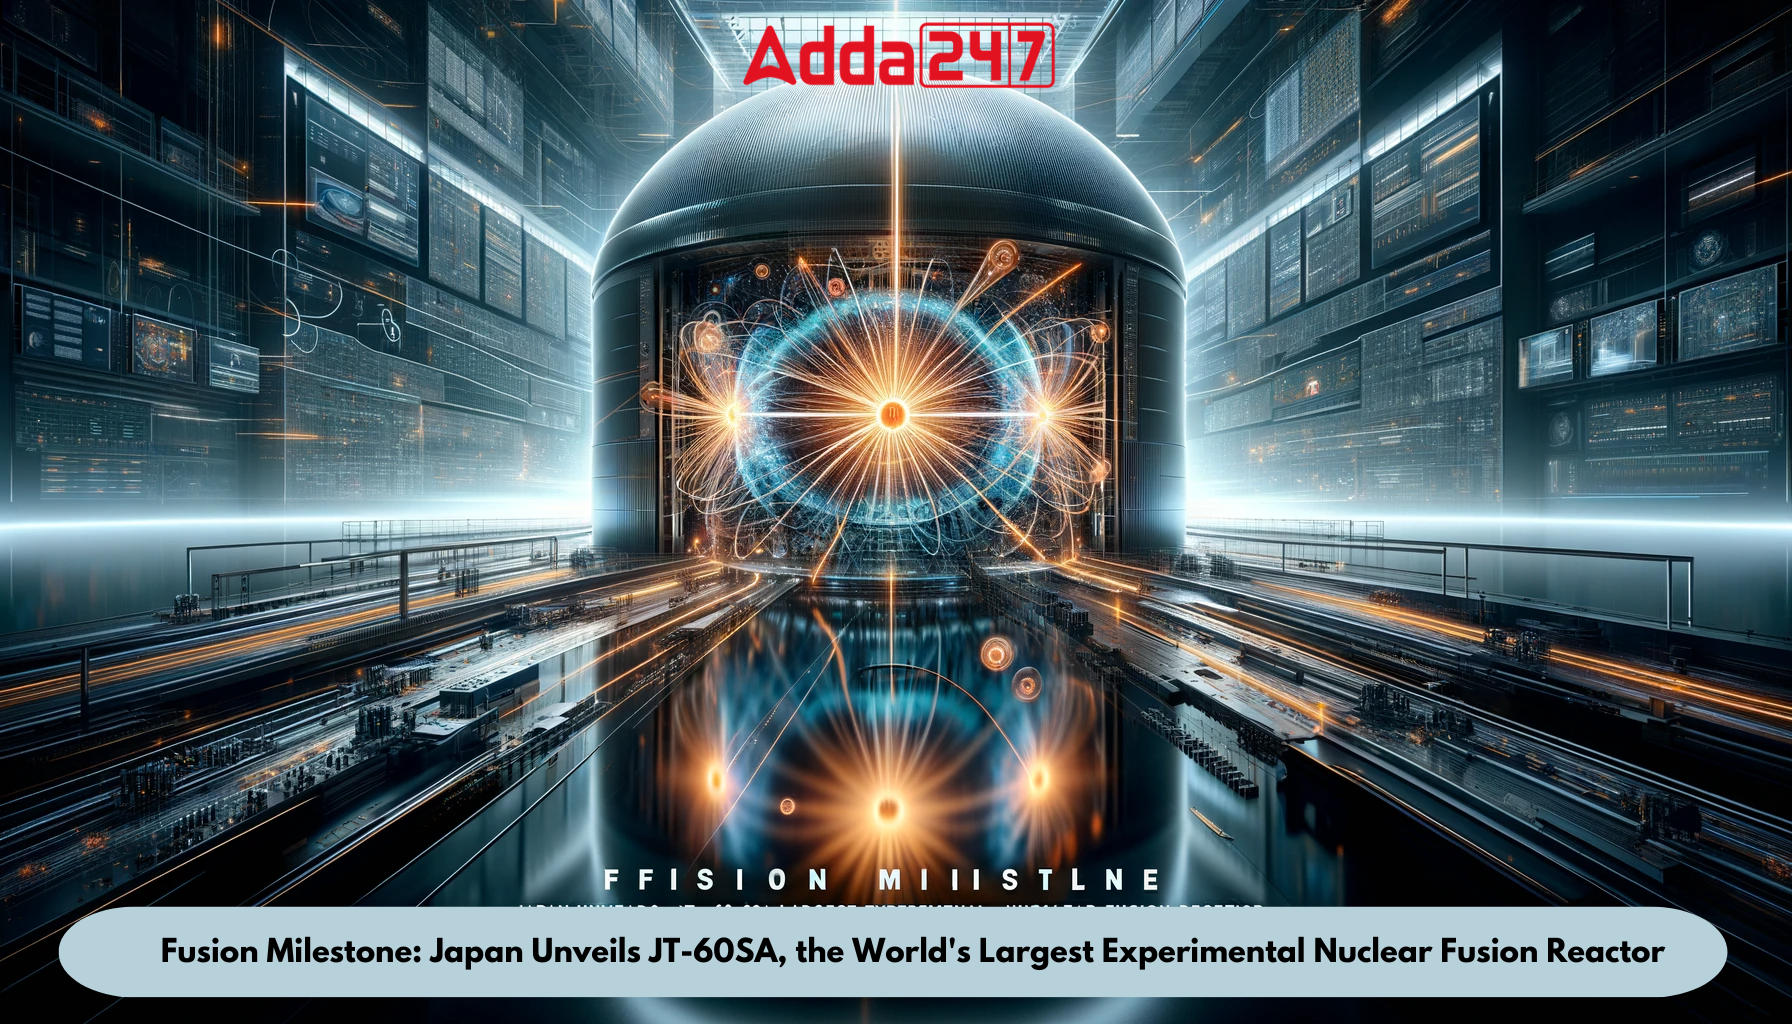 Fusion Milestone: Japan Unveils JT-60SA, the World's Largest Experimental Nuclear Fusion Reactor